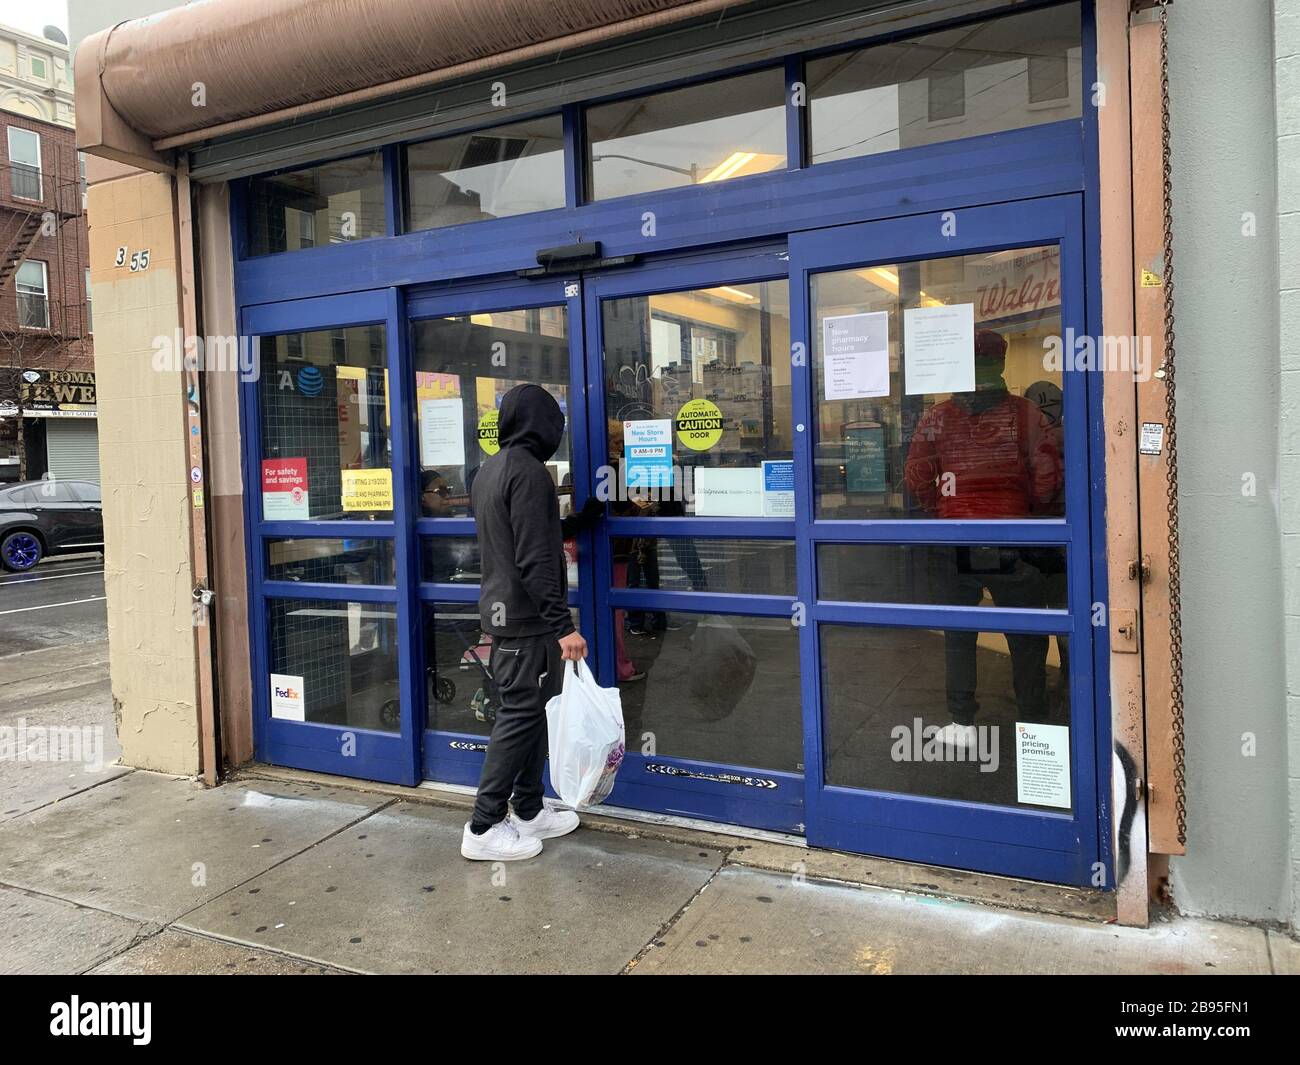 https://c8.alamy.com/comp/2B95FN1/international-brooklyn-usa-23rd-mar-2020-new-covid-19-walgreens-pharmacy-brooklyn-attends-2-people-at-a-time-march-23-2020-brooklyn-usathe-walgreens-pharmacy-on-knickerbocker-avenue-in-brooklyn-adopted-a-measure-to-serve-up-to-two-people-at-a-time-through-the-entrance-to-contain-the-spread-of-coronavirus-this-monday-23creditniyi-fotethenews2-credit-niyi-fotethenews2zuma-wirealamy-live-news-2B95FN1.jpg